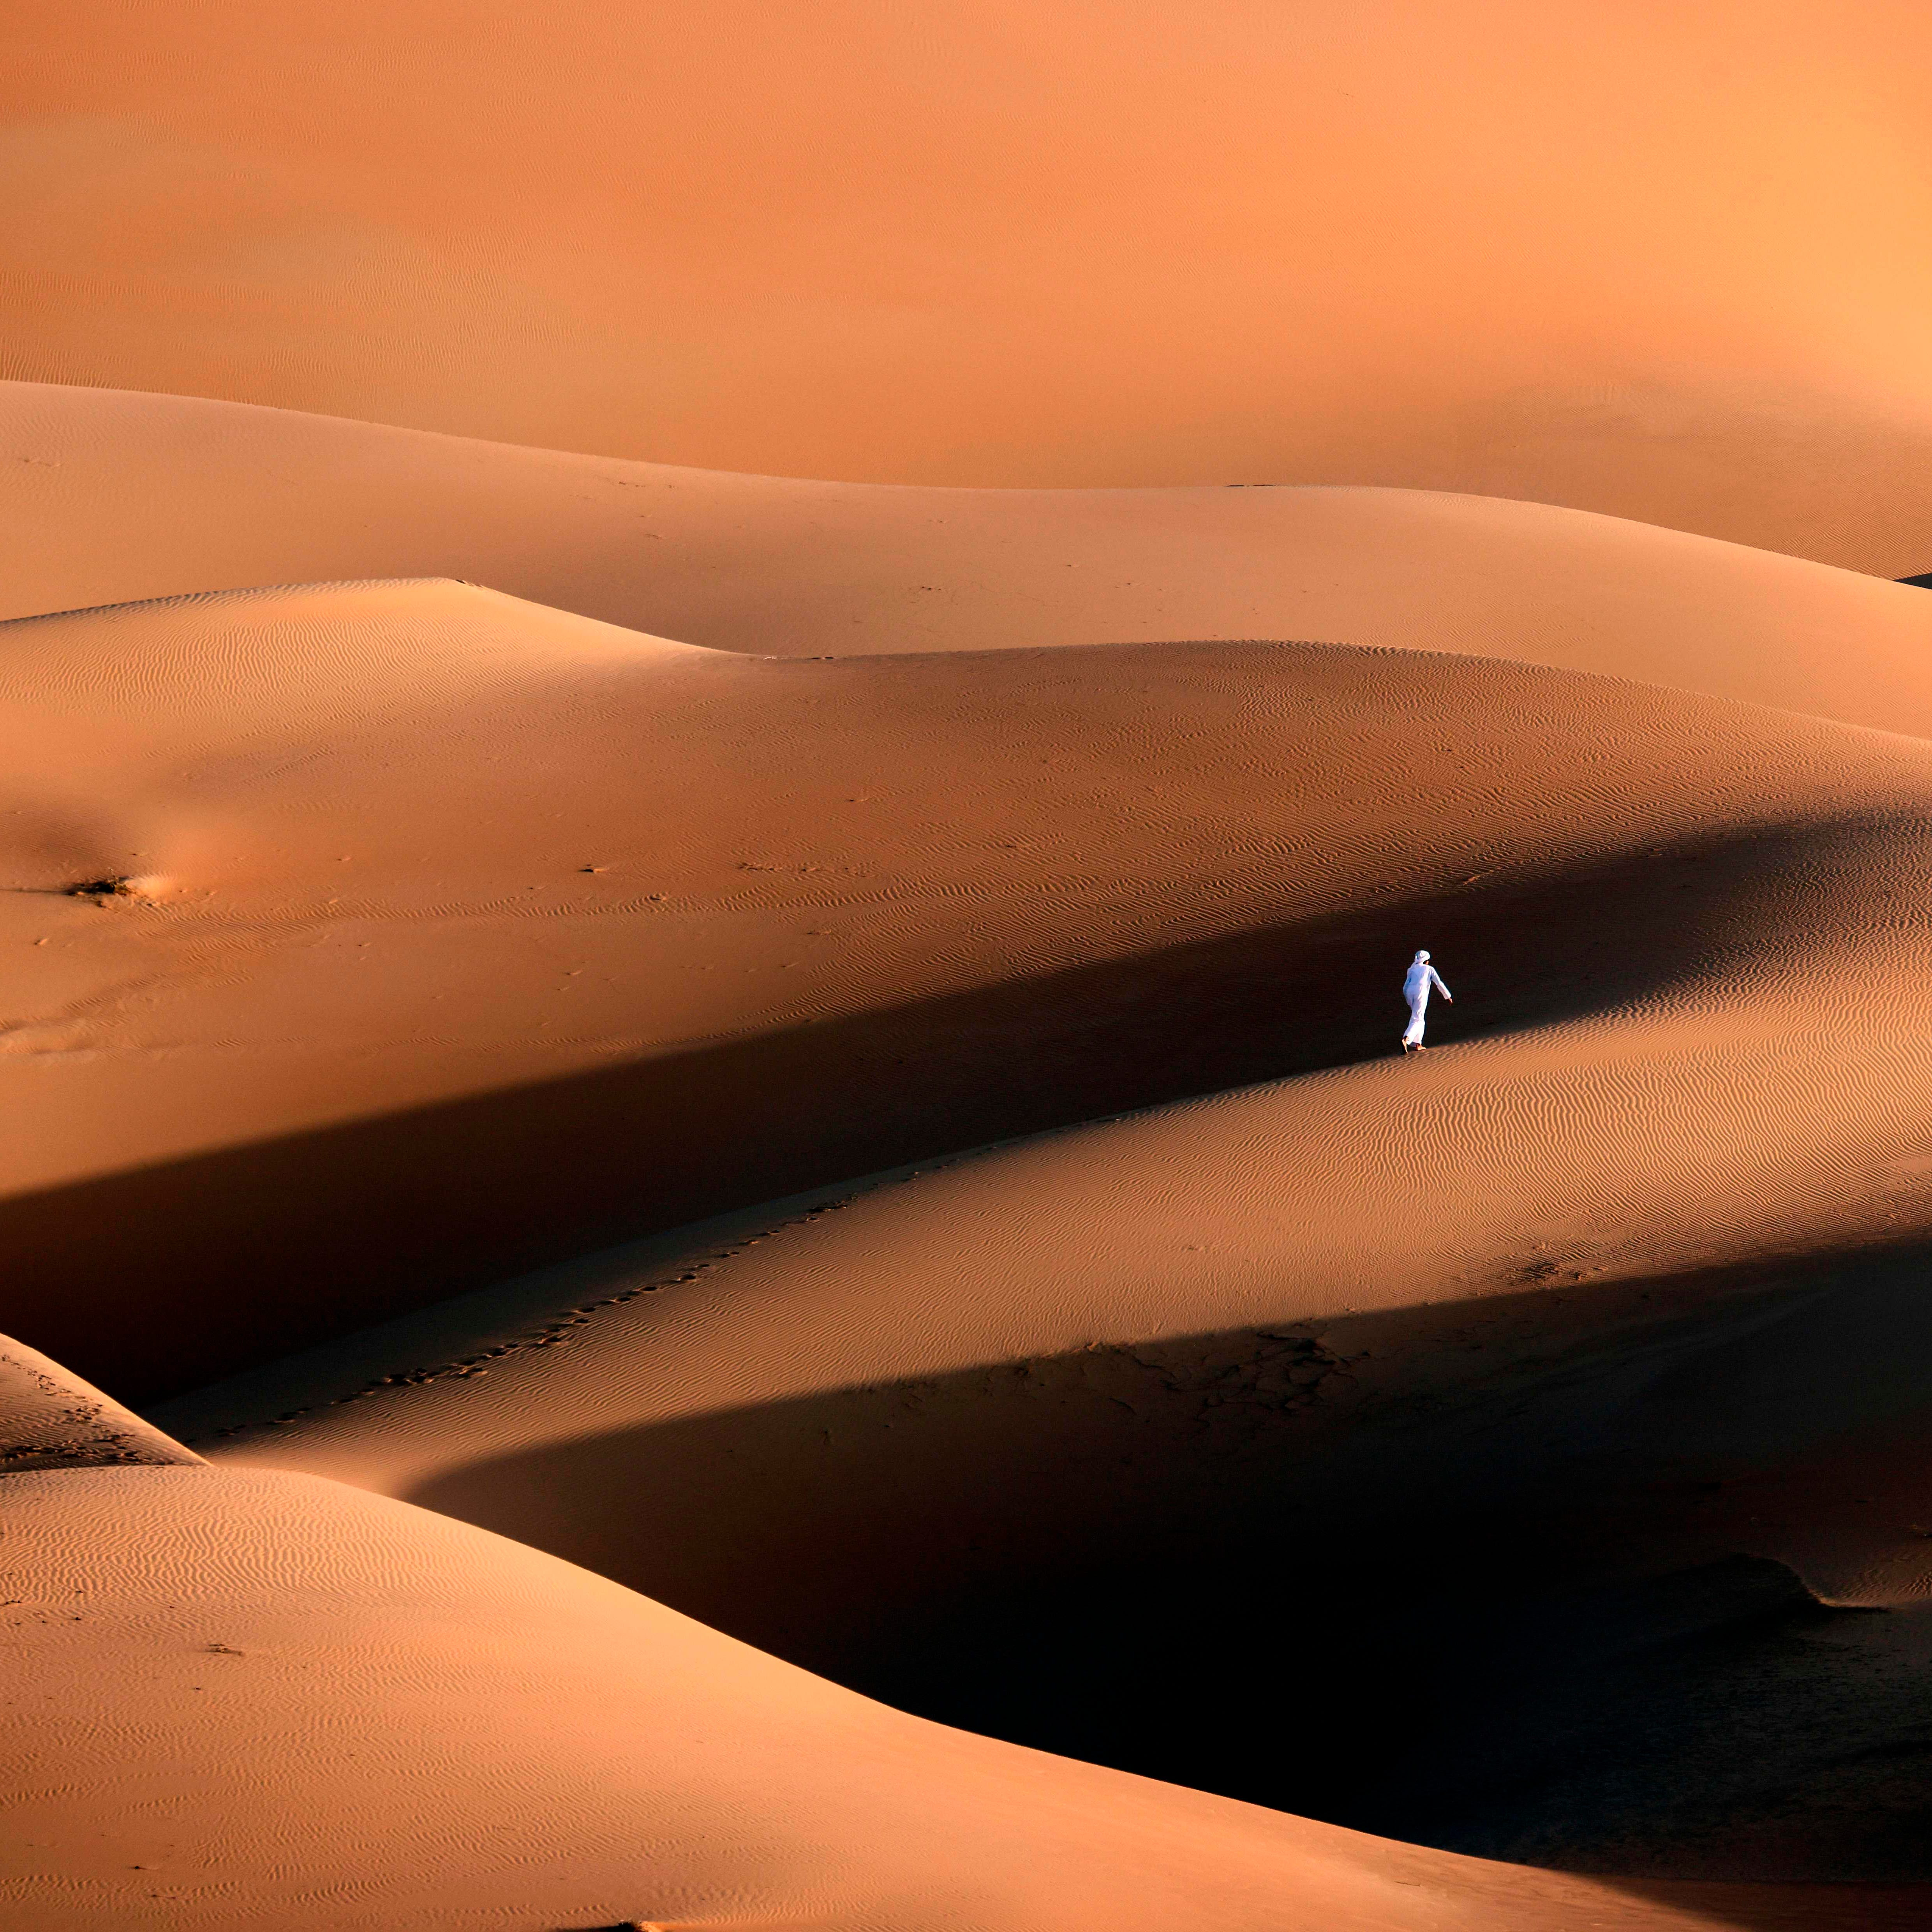 January 9, 2021: An Emirati youth plays in the sand dunes in the Liwa desert, some 250 kilometres west of the Gulf emirate of Abu Dhabi.